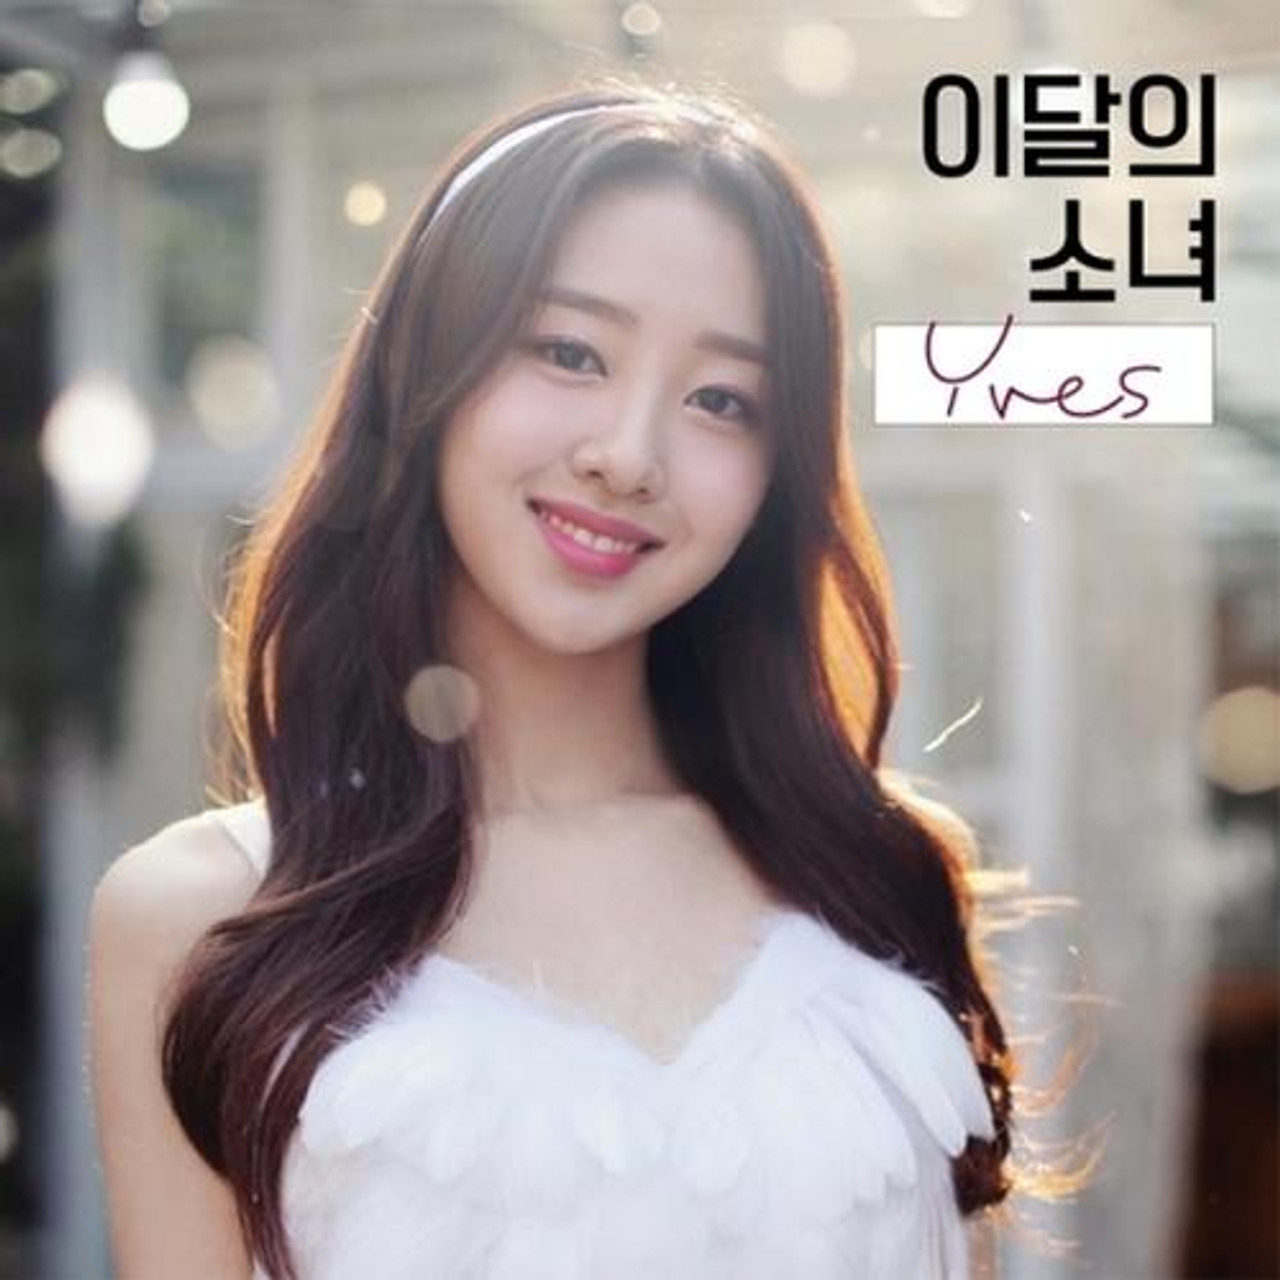 This Month’s Girl (LOONA) - Single Album [YVES] A ver. - interAsia